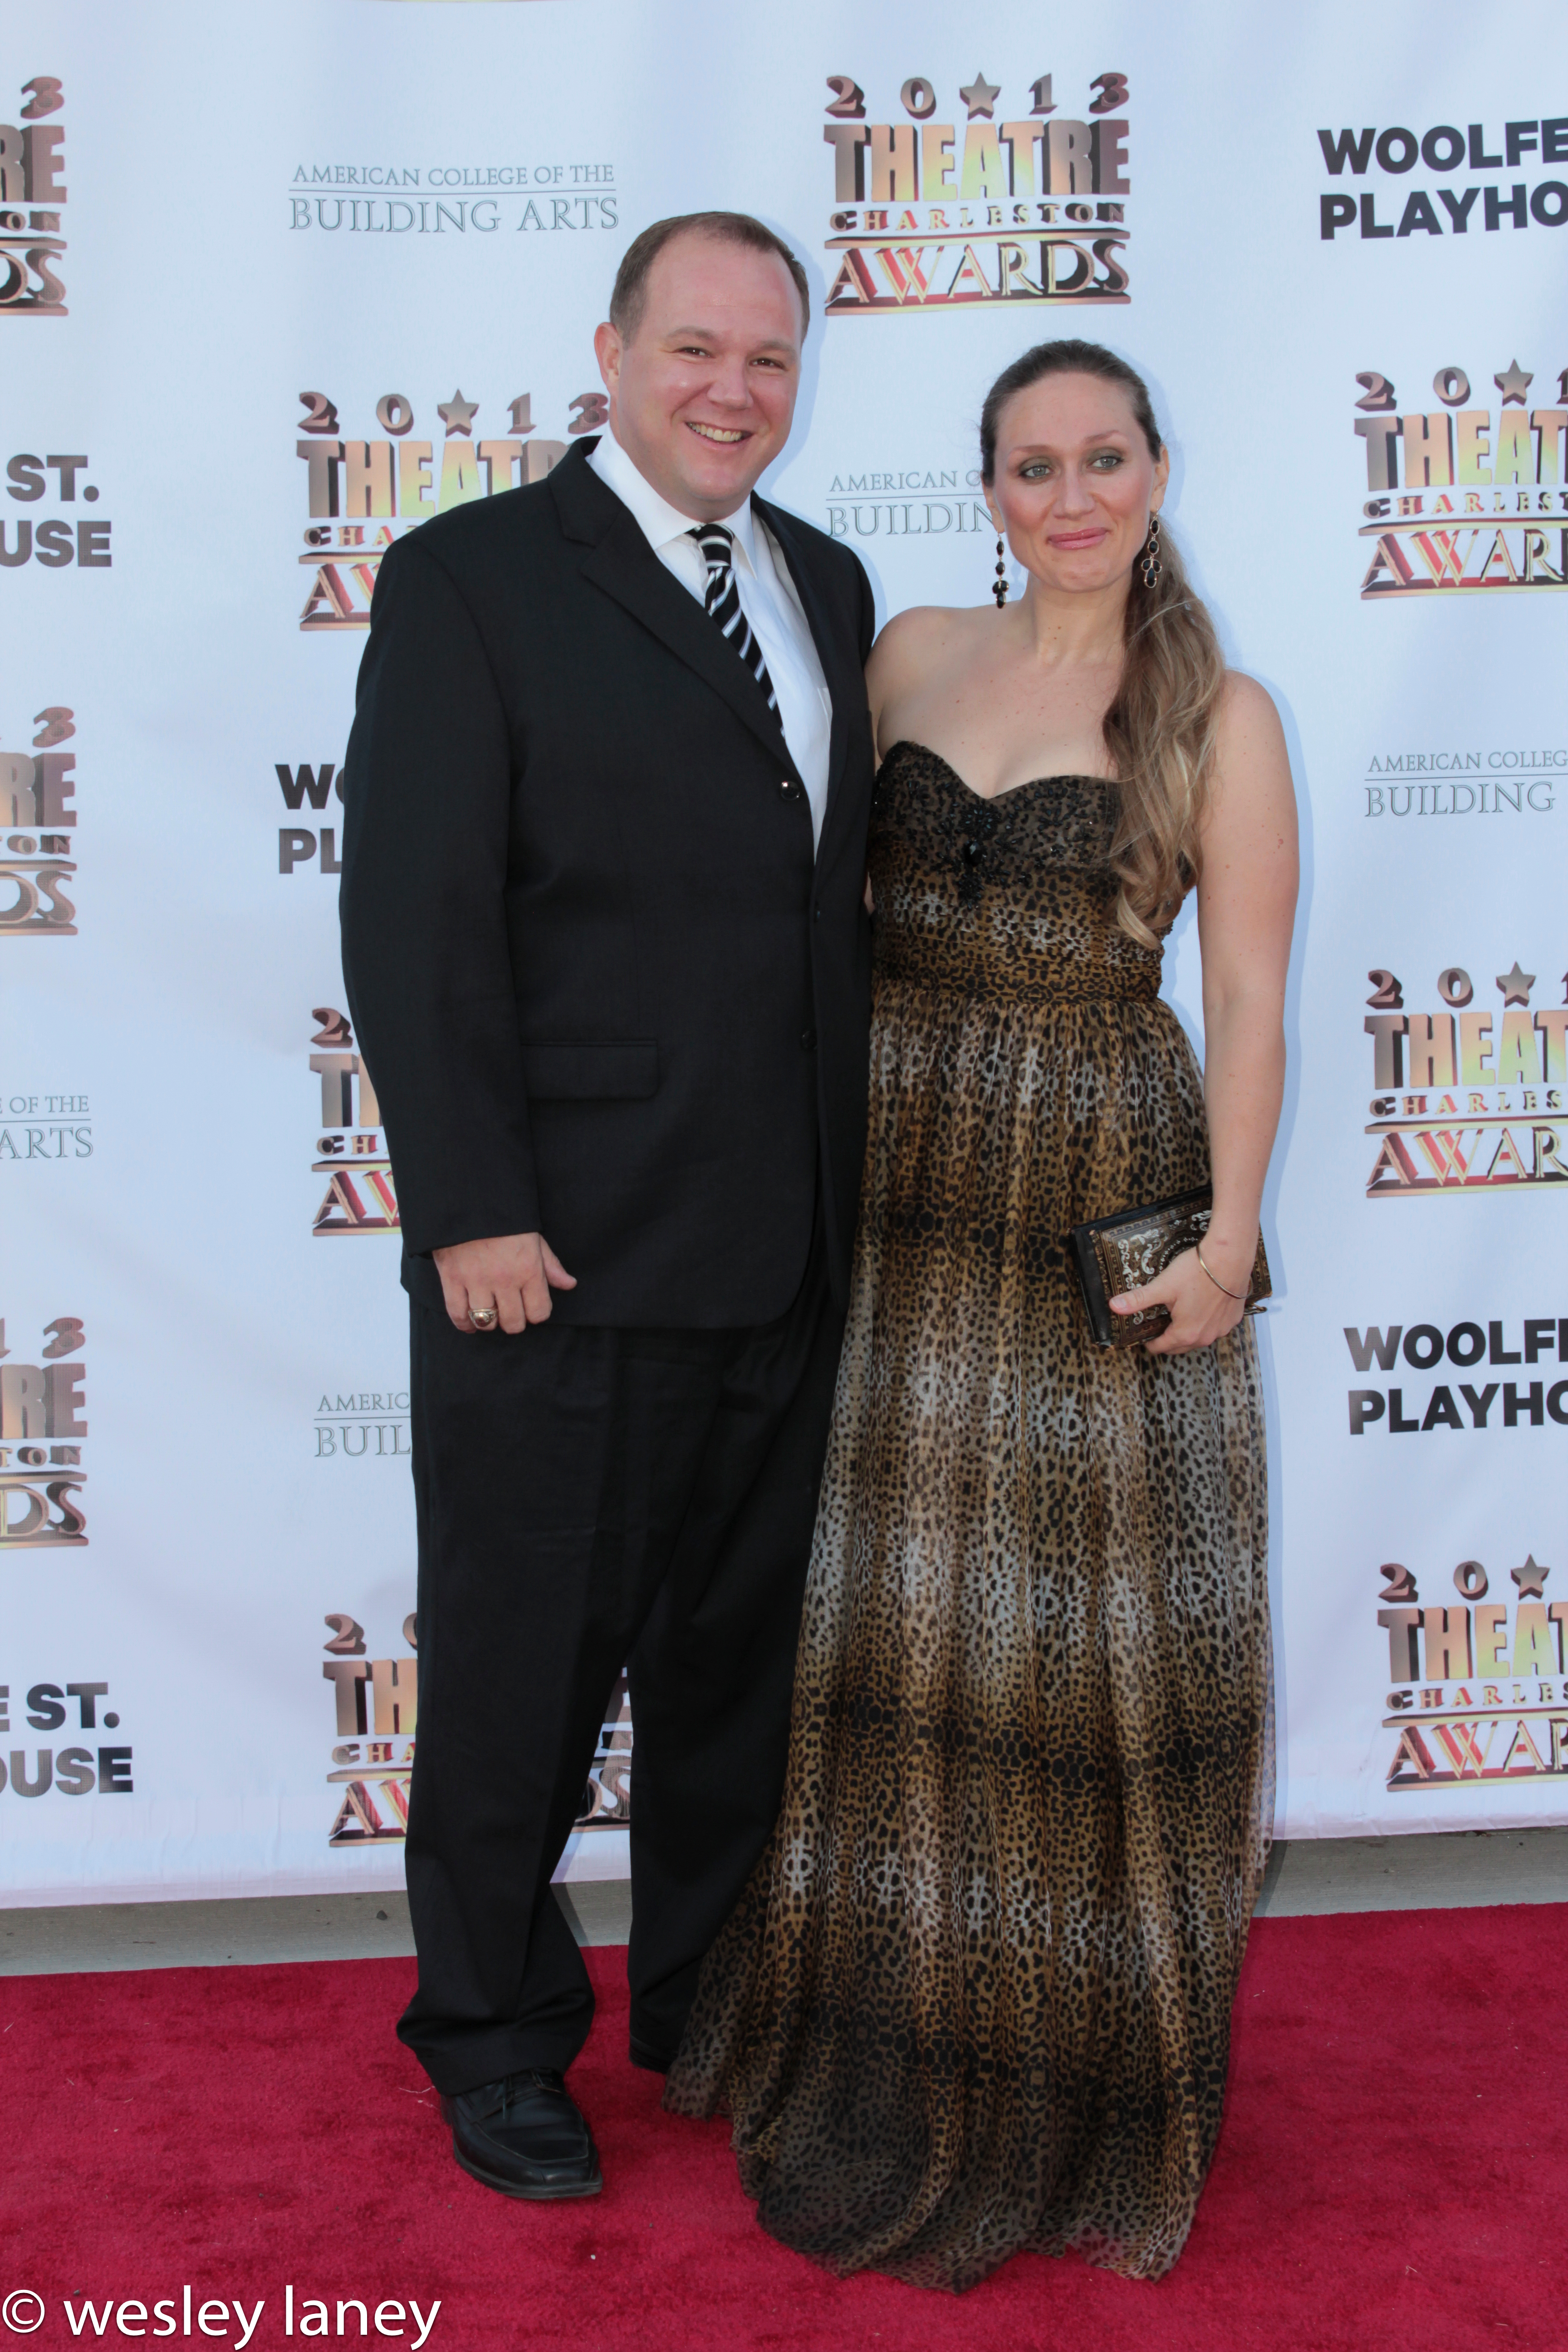 Dan and Becca Anderson on the red carpet for the 2013 Theatre Charleston Awards